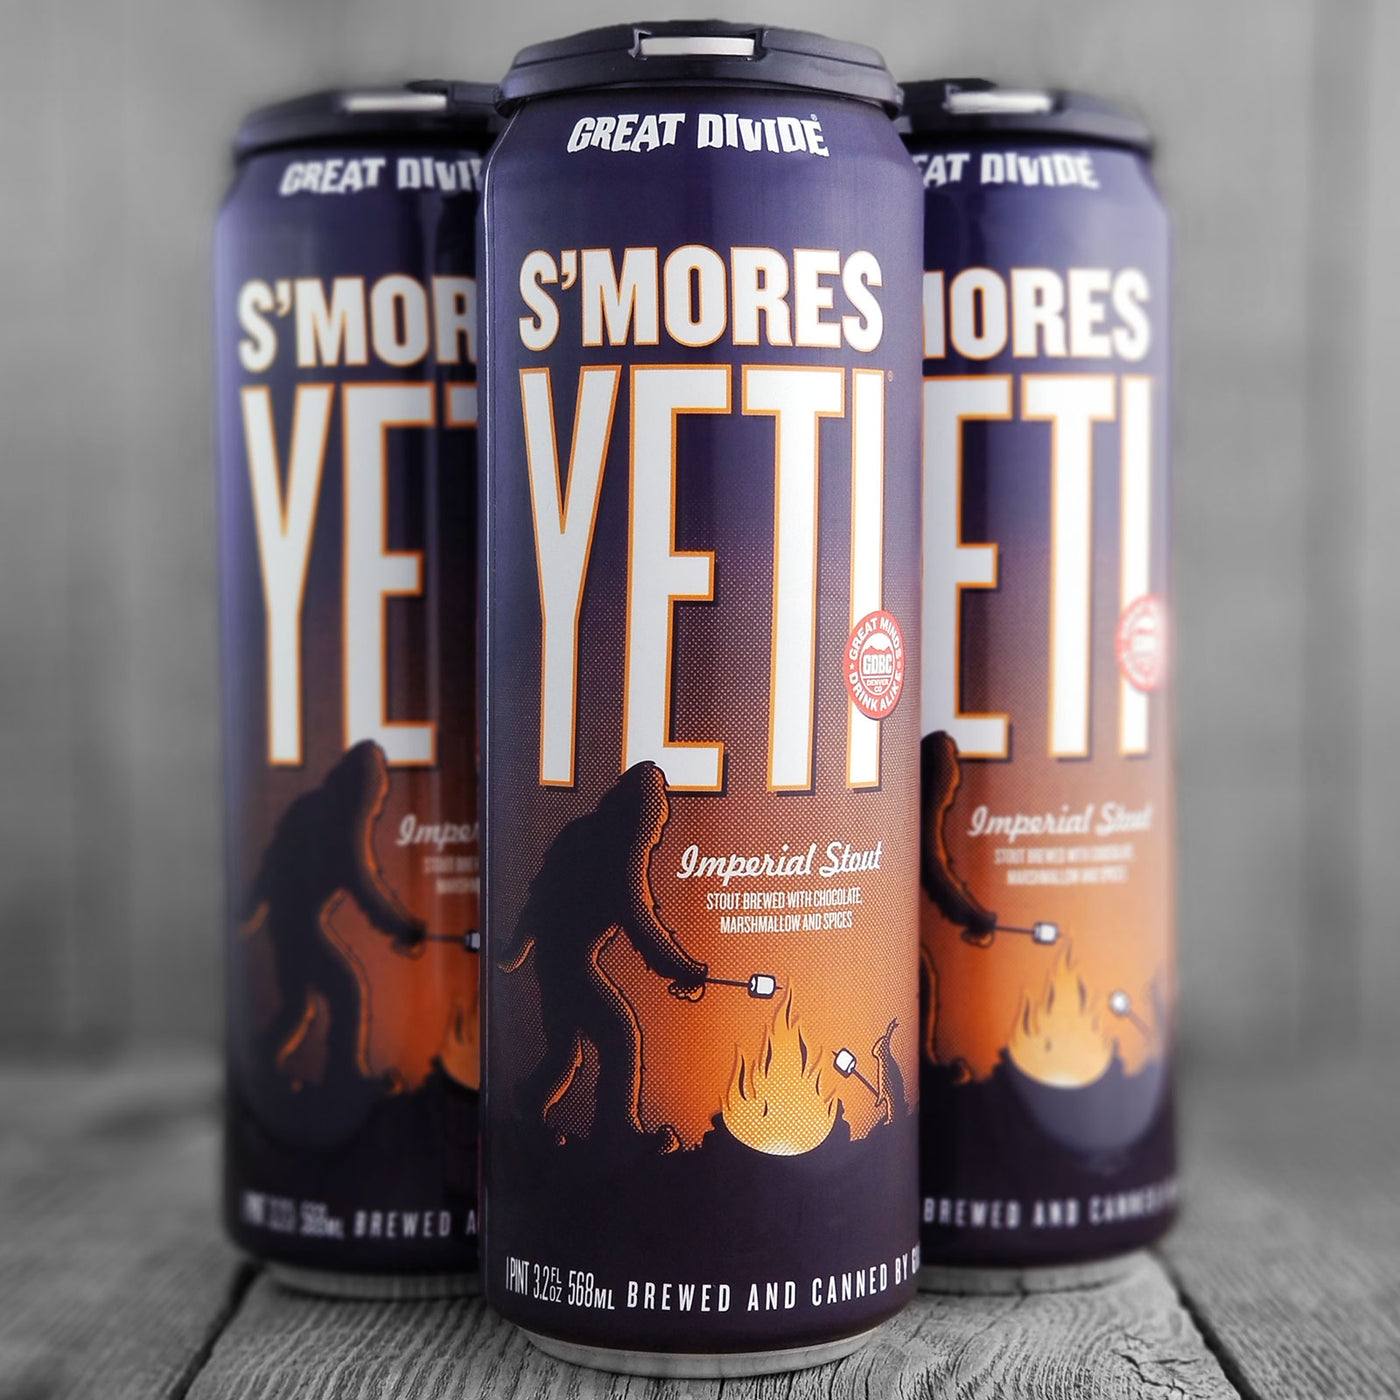 Great Divide S'mores Yeti